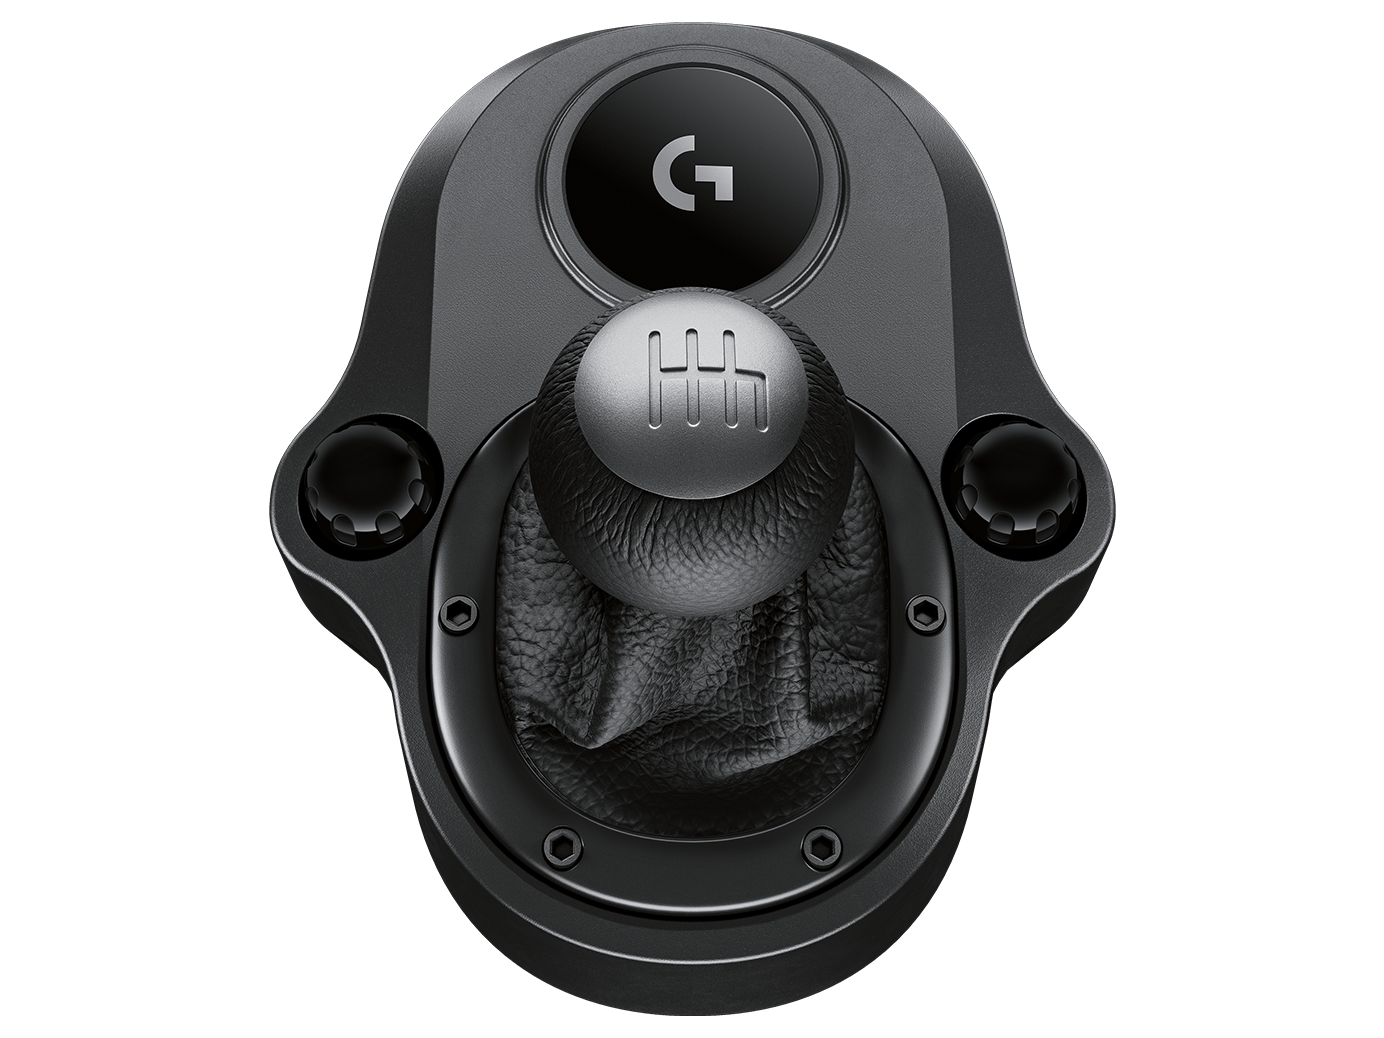 Image of Driving Force Shifter For G923, G29 and G920 Racing Wheels